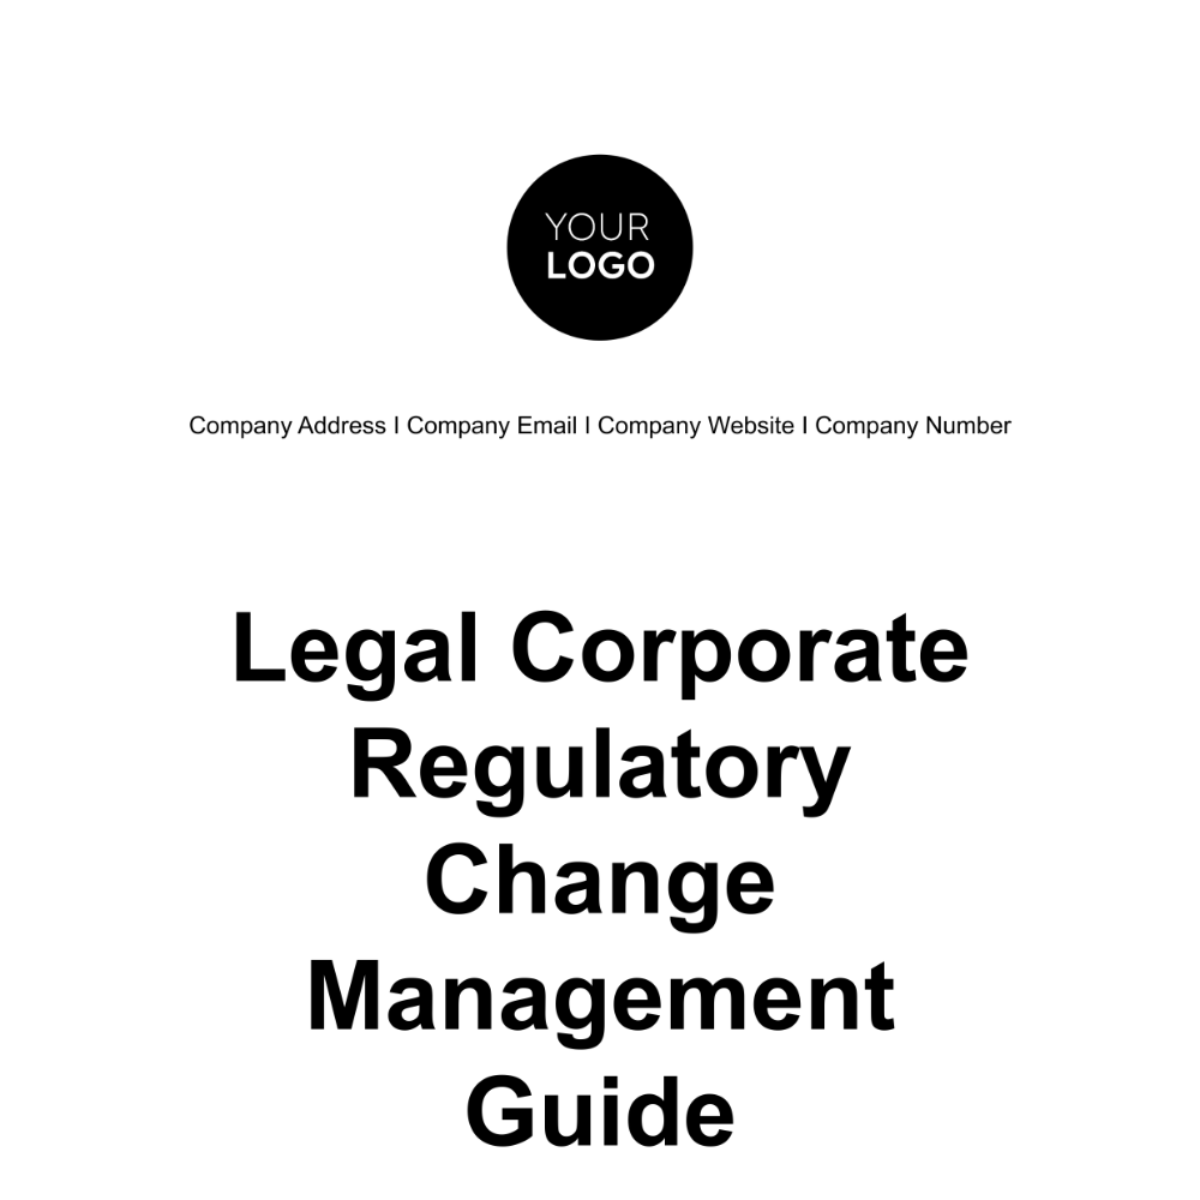 Legal Corporate Regulatory Change Management Guide Template